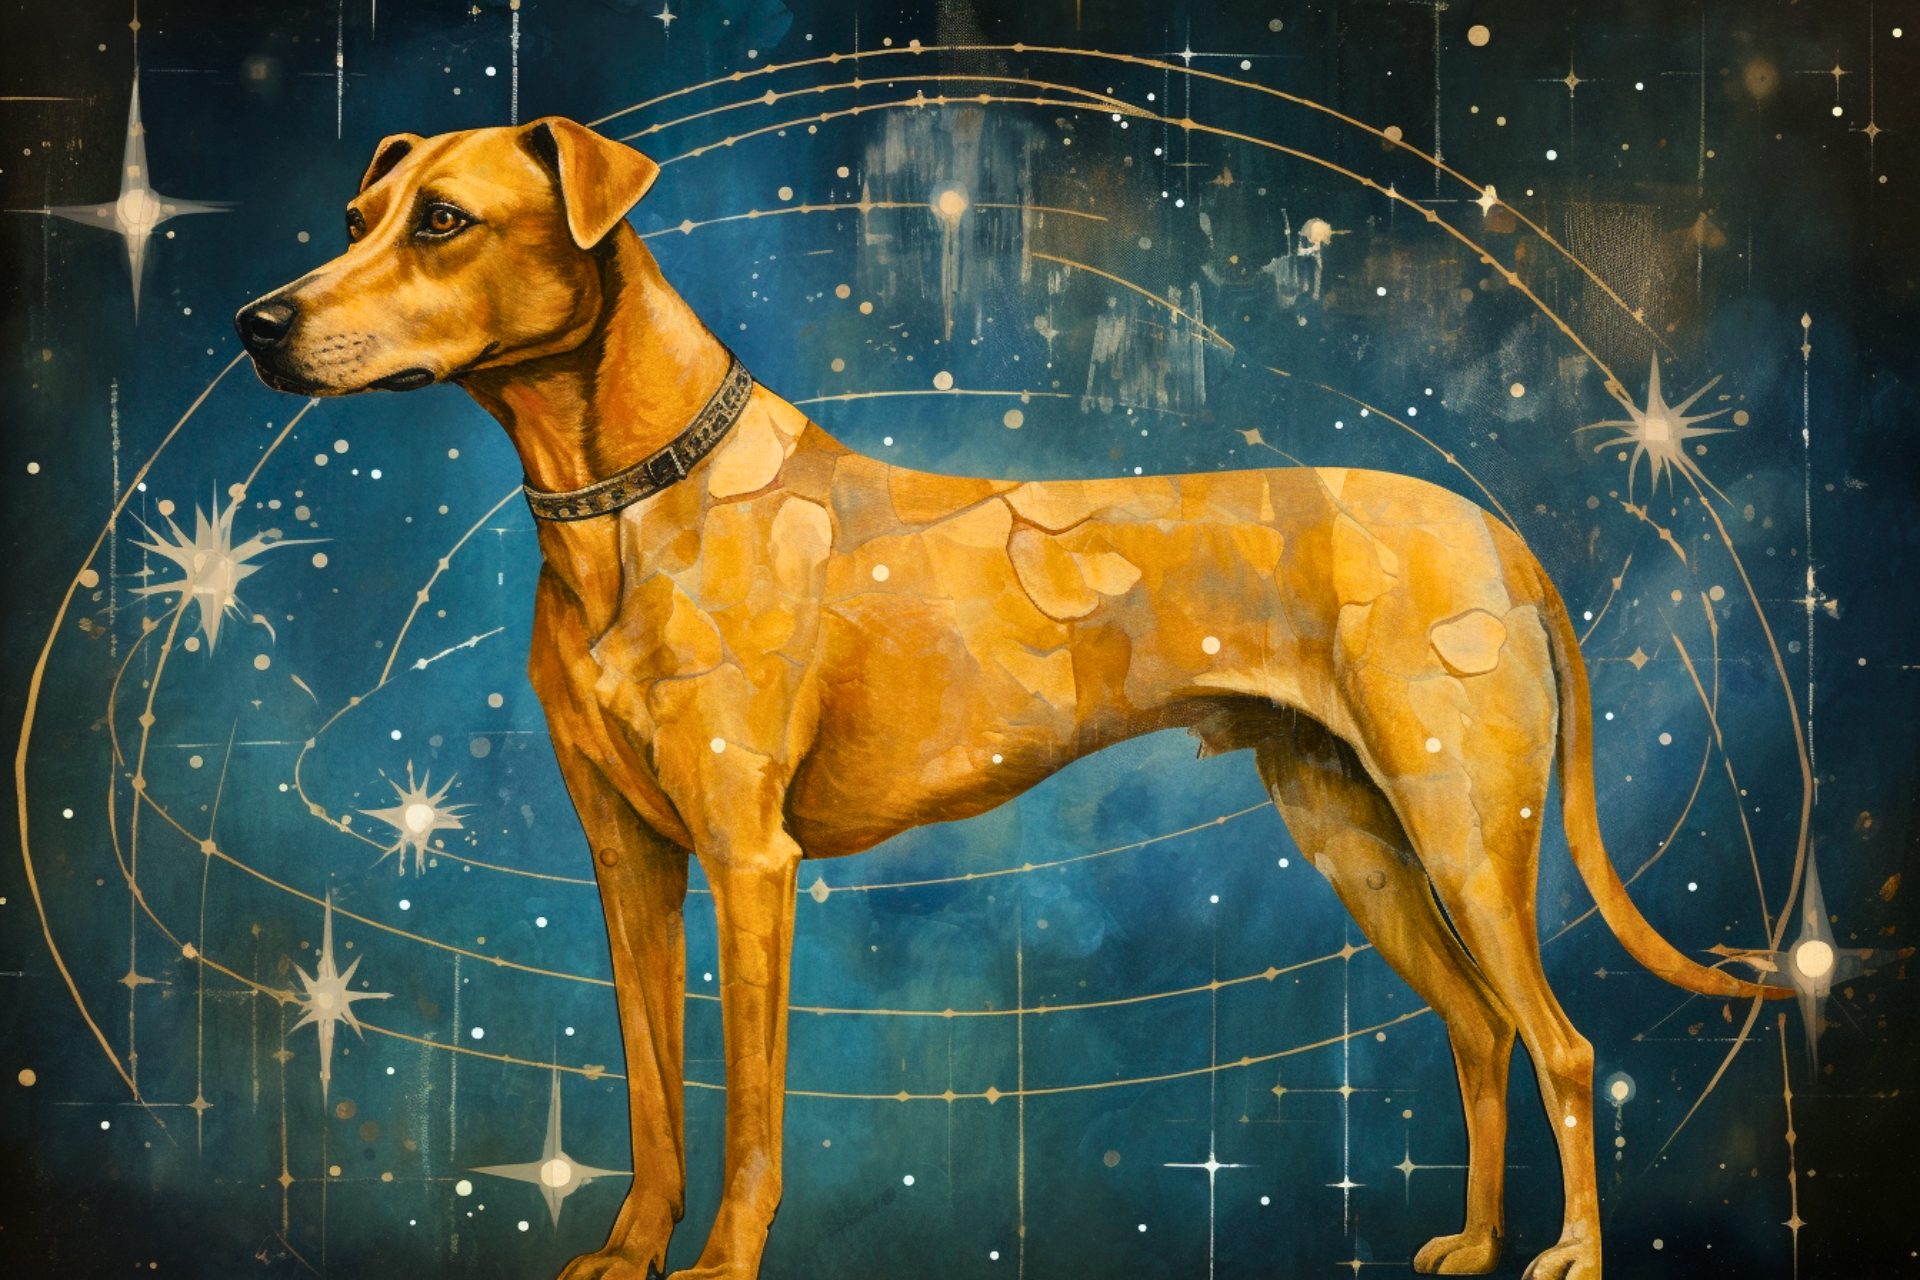 An illustration of a golden dog on a background of stars, representing the constellation Canis Major.